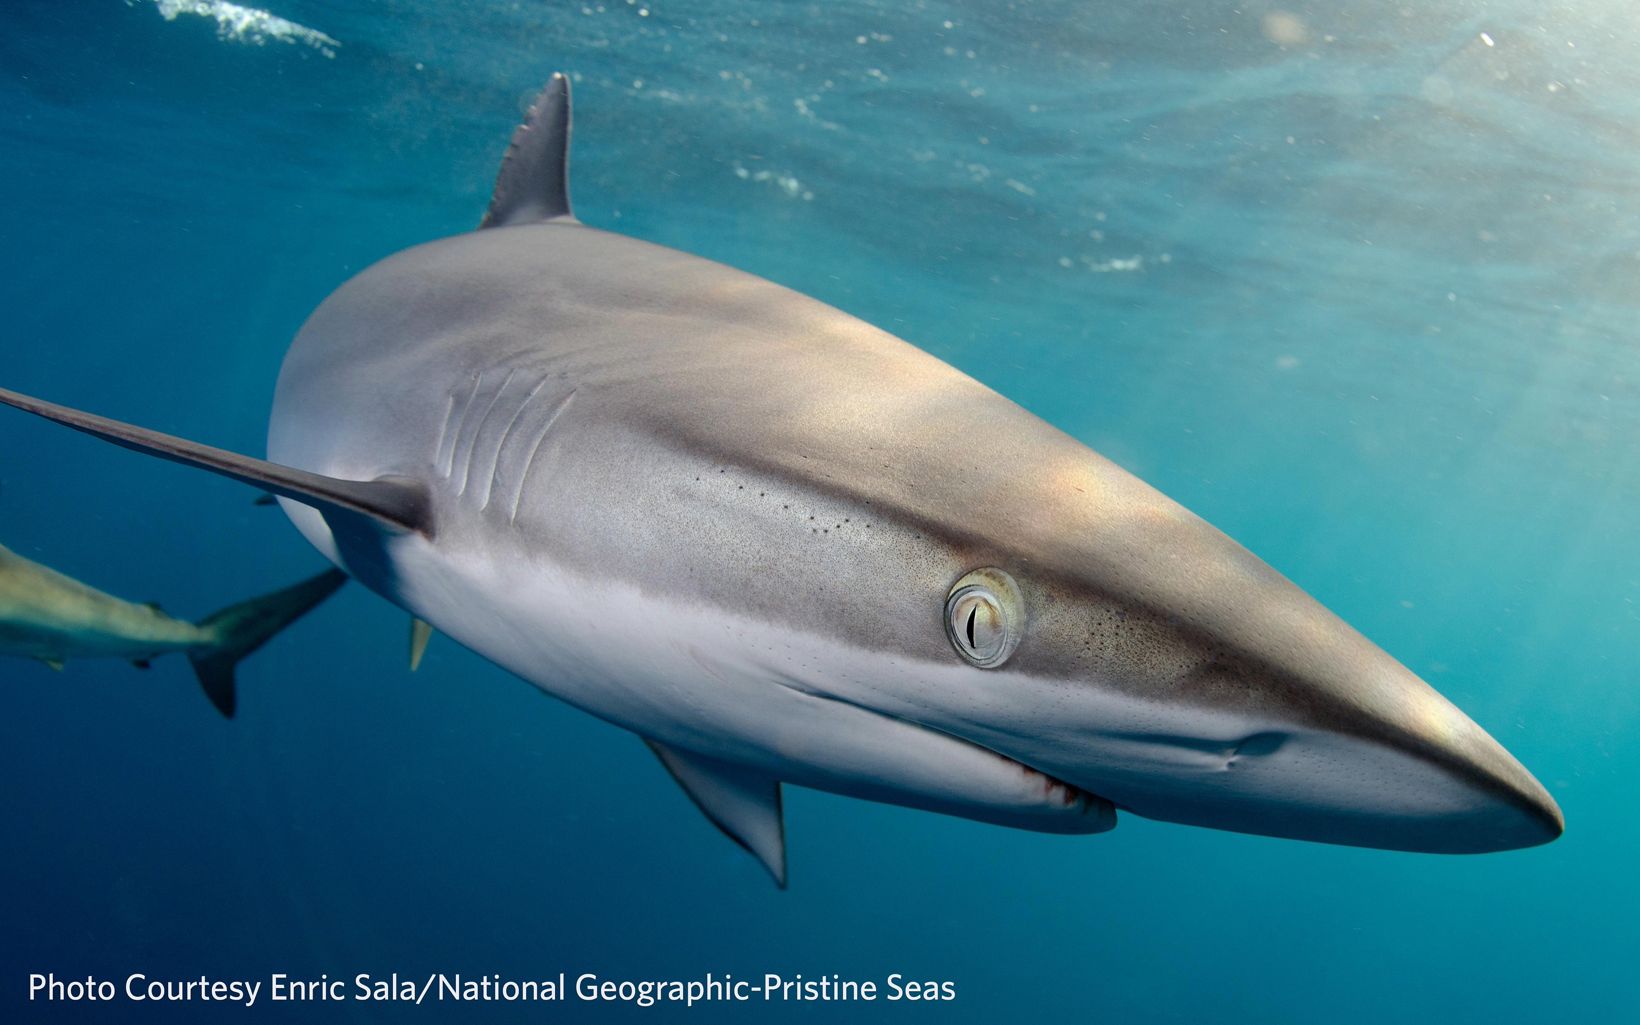 Silky Shark Silky sharks came to inspect the Waitt Foundation’s remotely operated vehicle during the 2012 Pristine Seas expedition to Gabon.  © Photo Courtesy Enric Sala/National Geographic-Pristine Seas.